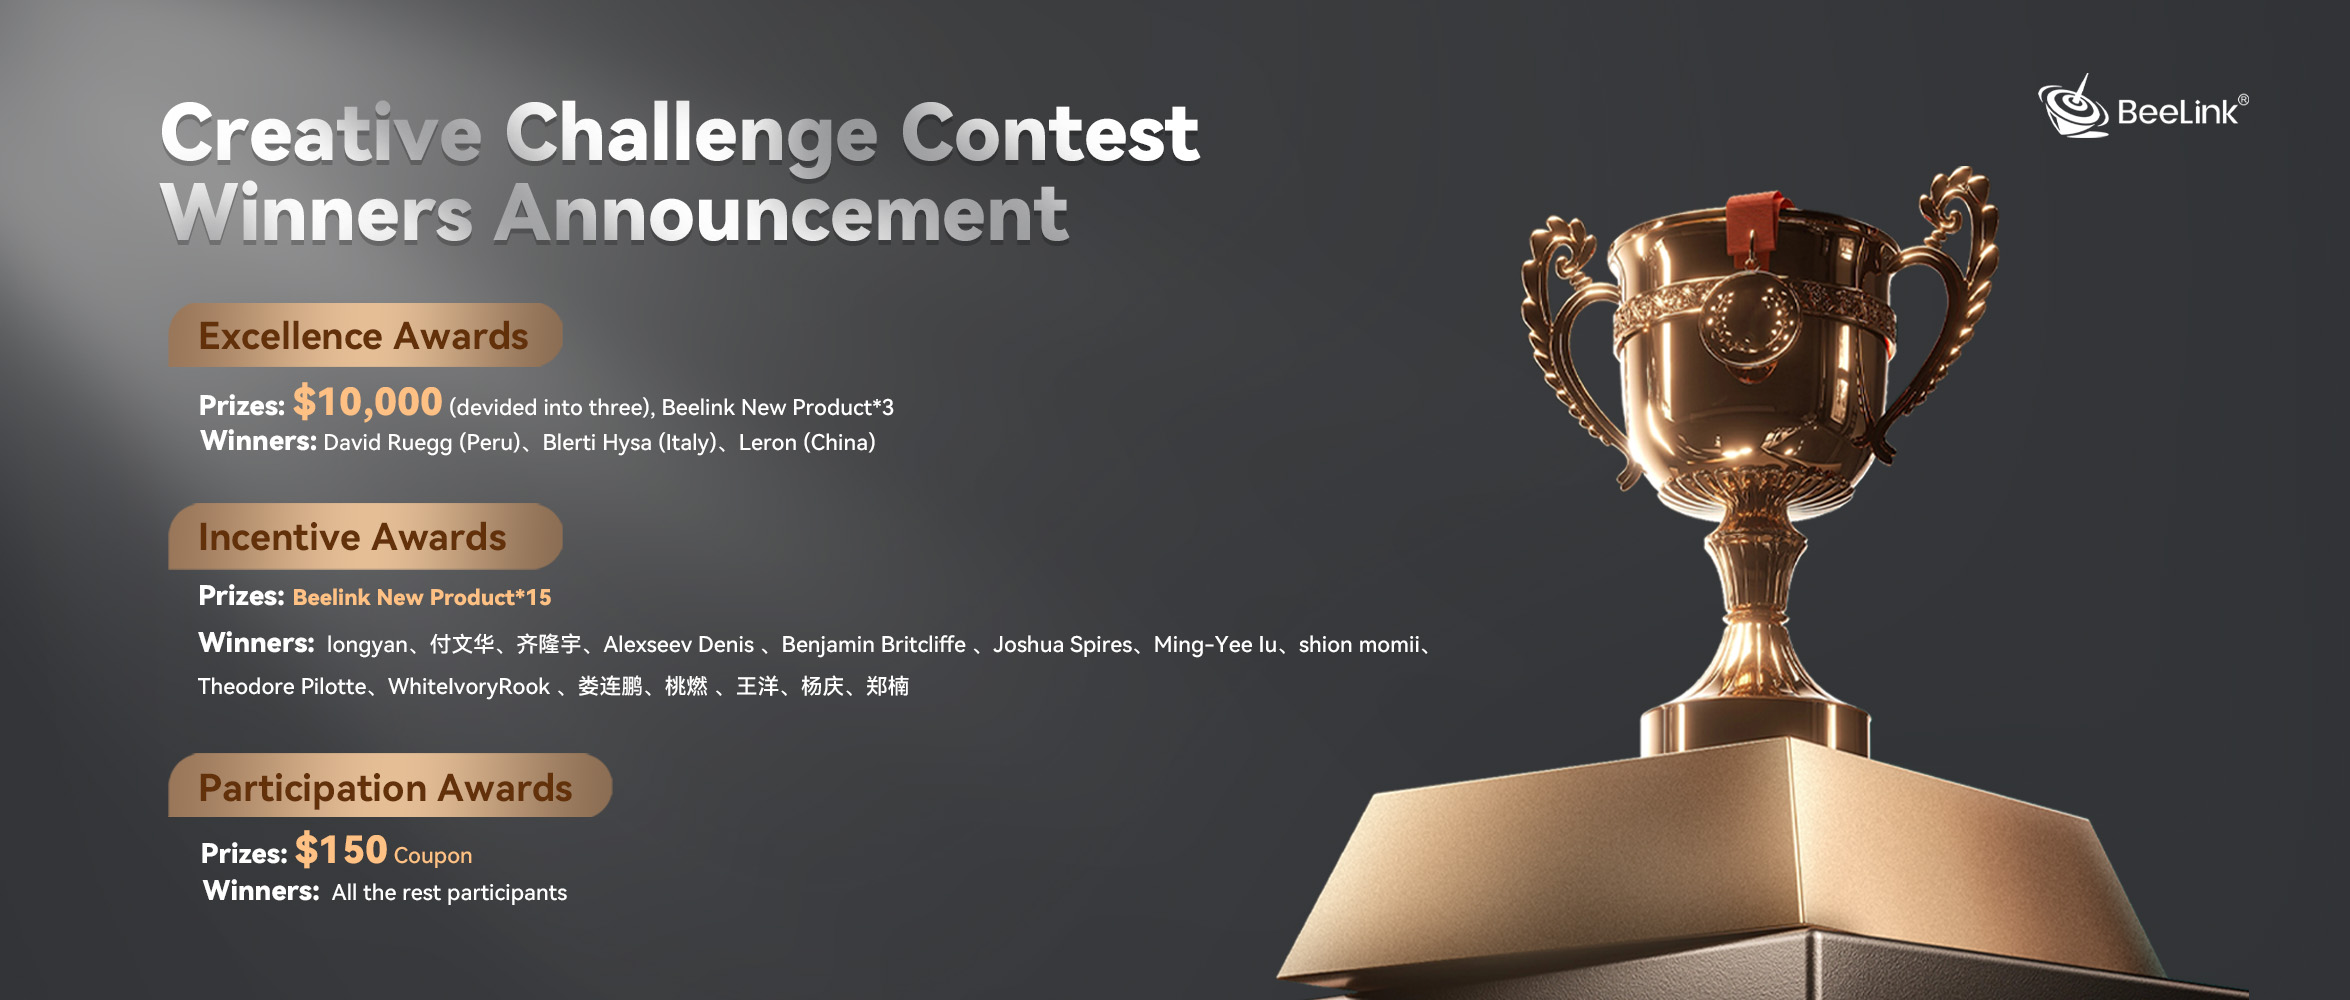 Check Out the Winners of the Beelink Creative Challenge Contest Now!  The Winners are... You!!